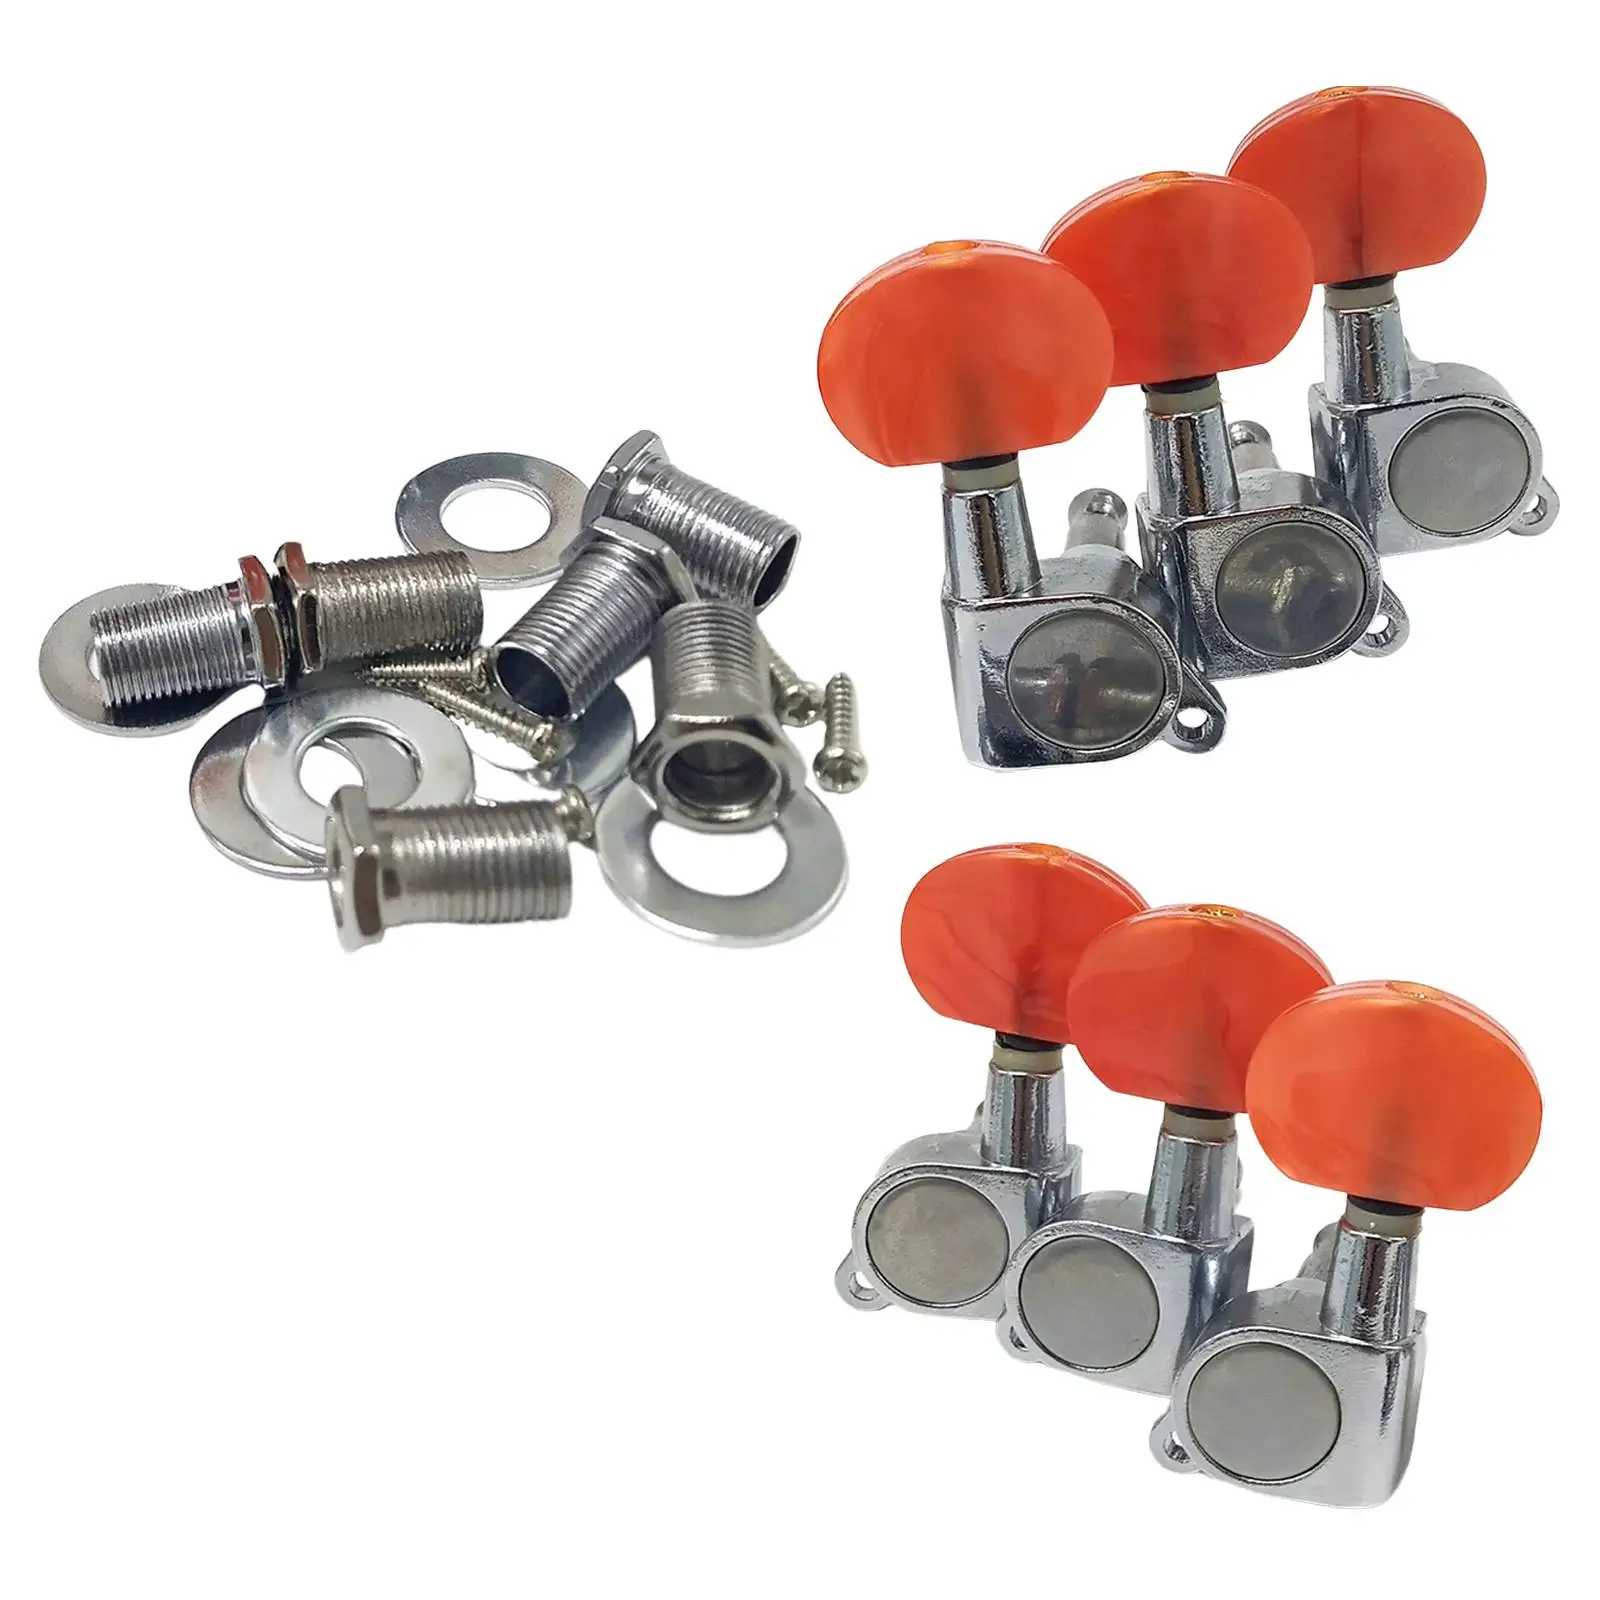 6 Pieces 3L3R Guitar Tuner Pegs Key Peg Knobs Tuners for Acoustic Guitar